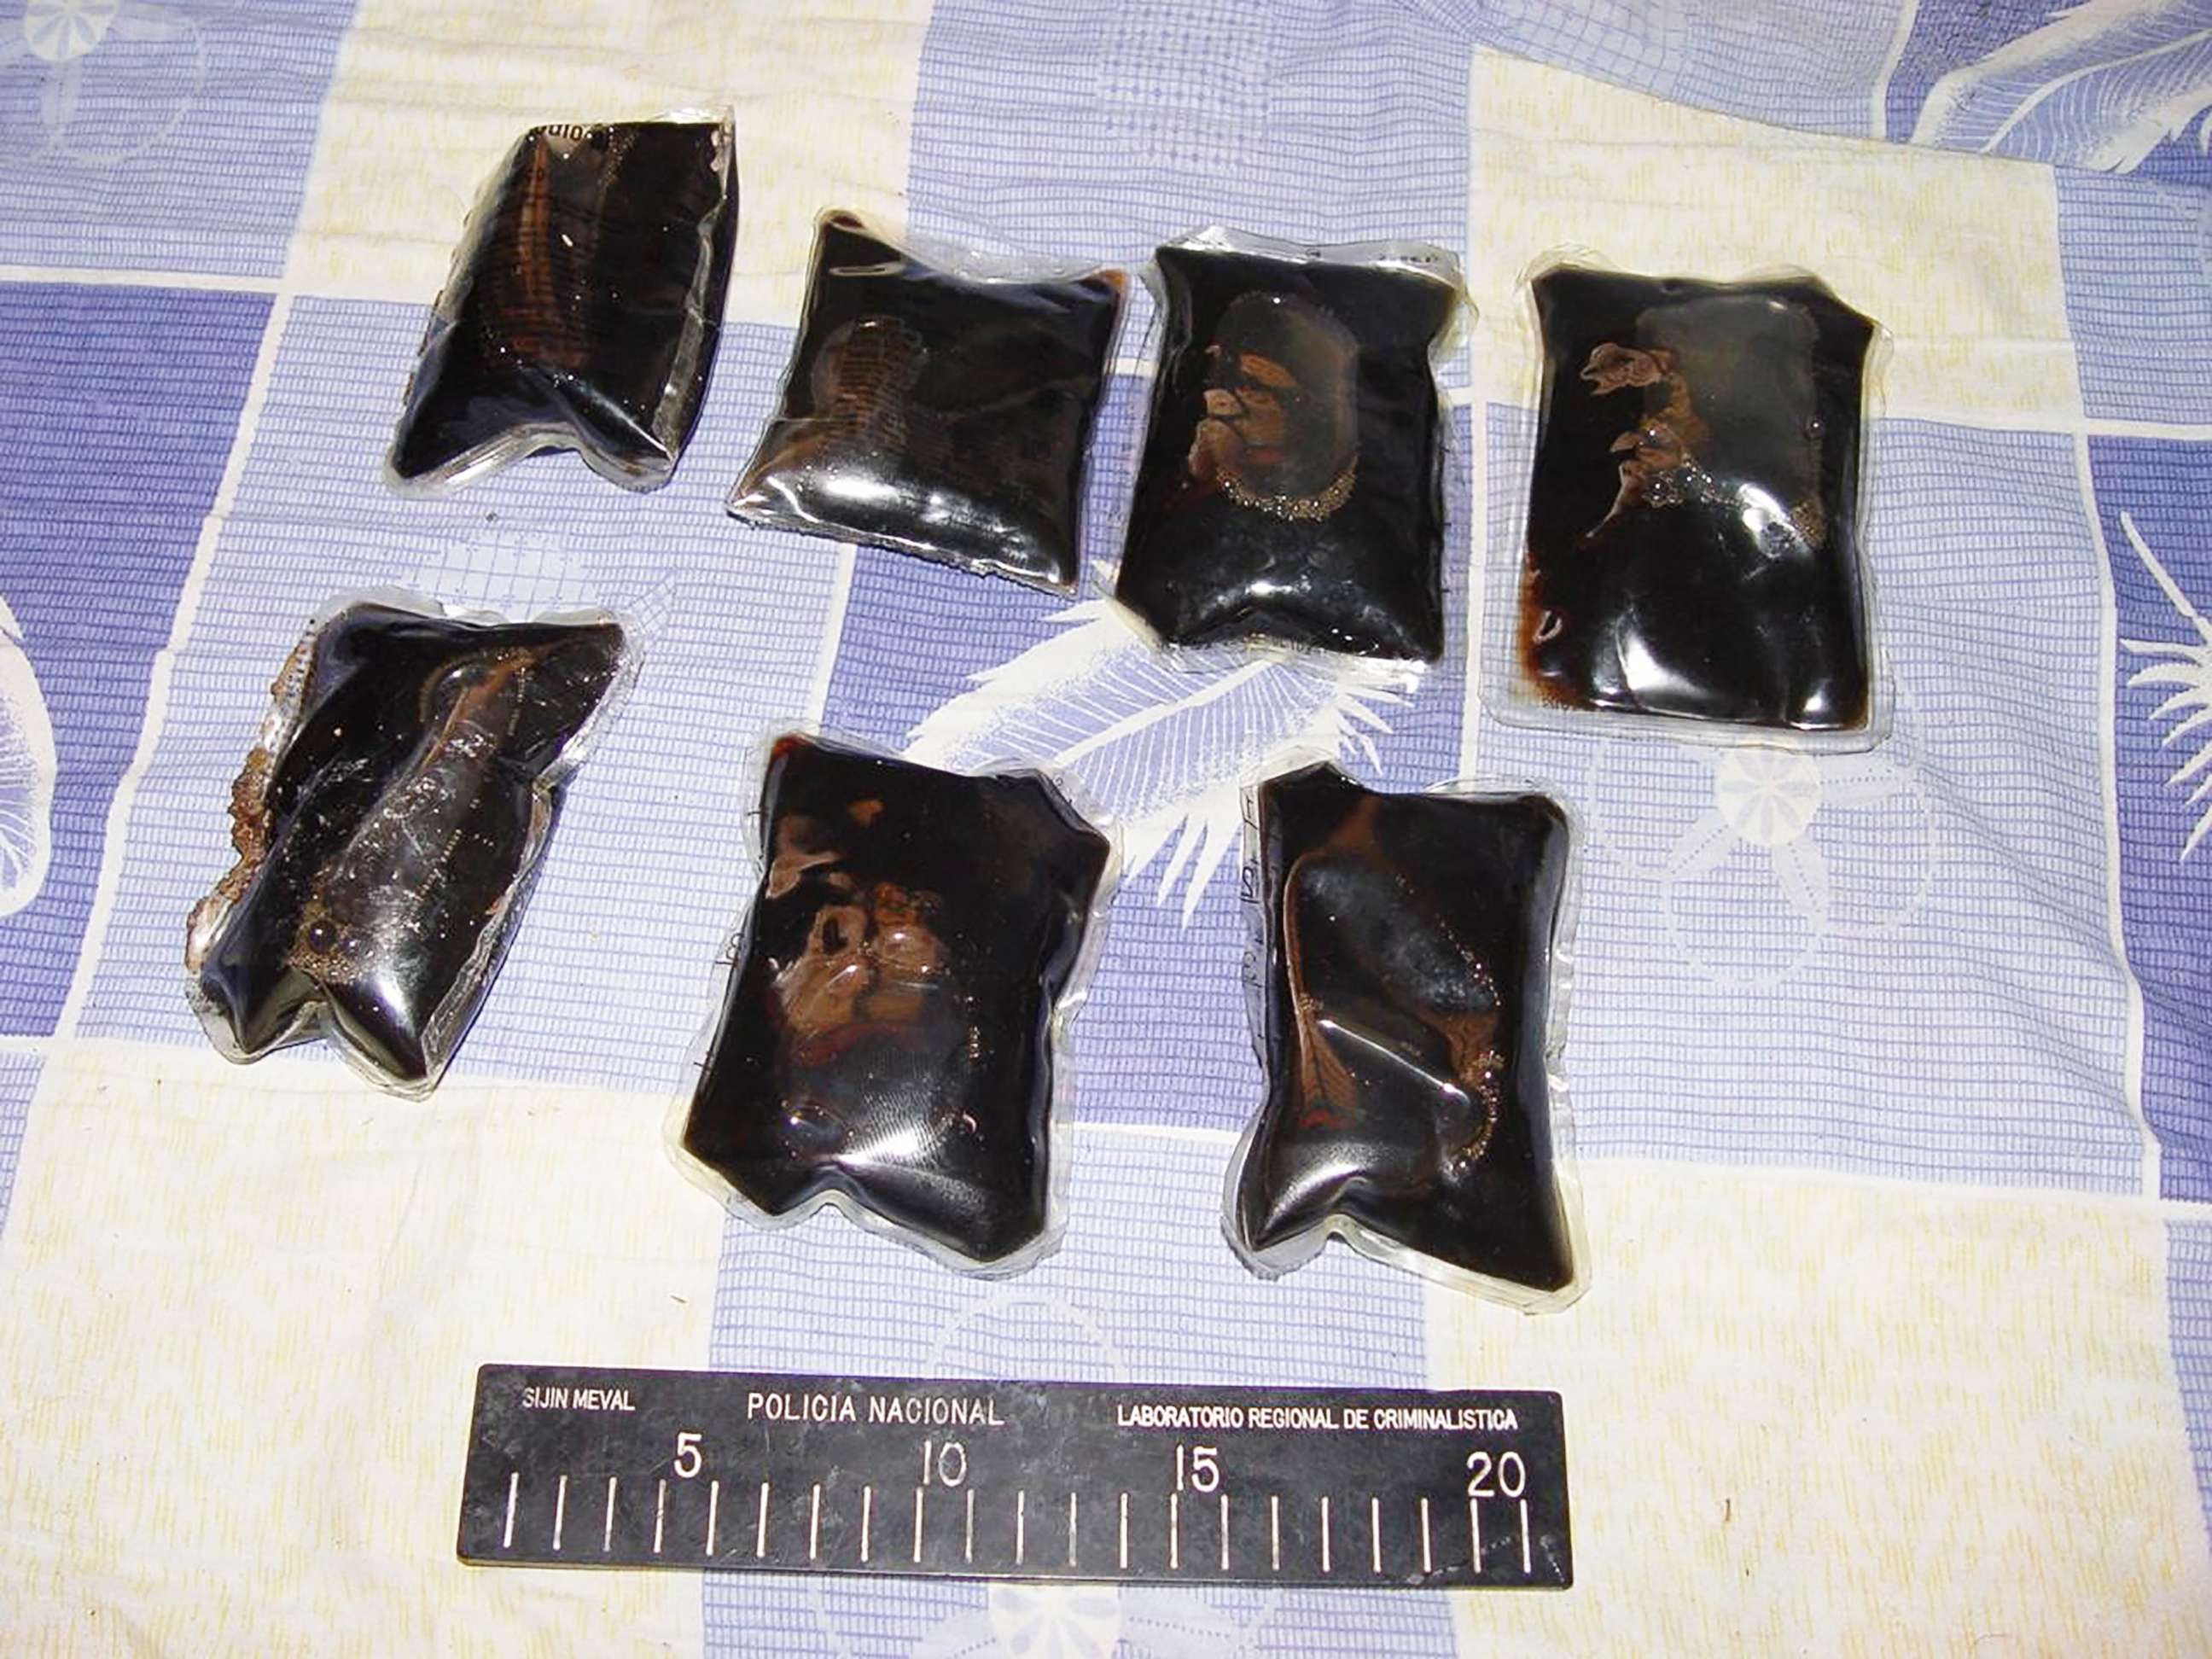 PHOTO: Bags of liquid heroin were surgically placed into the bellies of puppies being transported into the U.S.